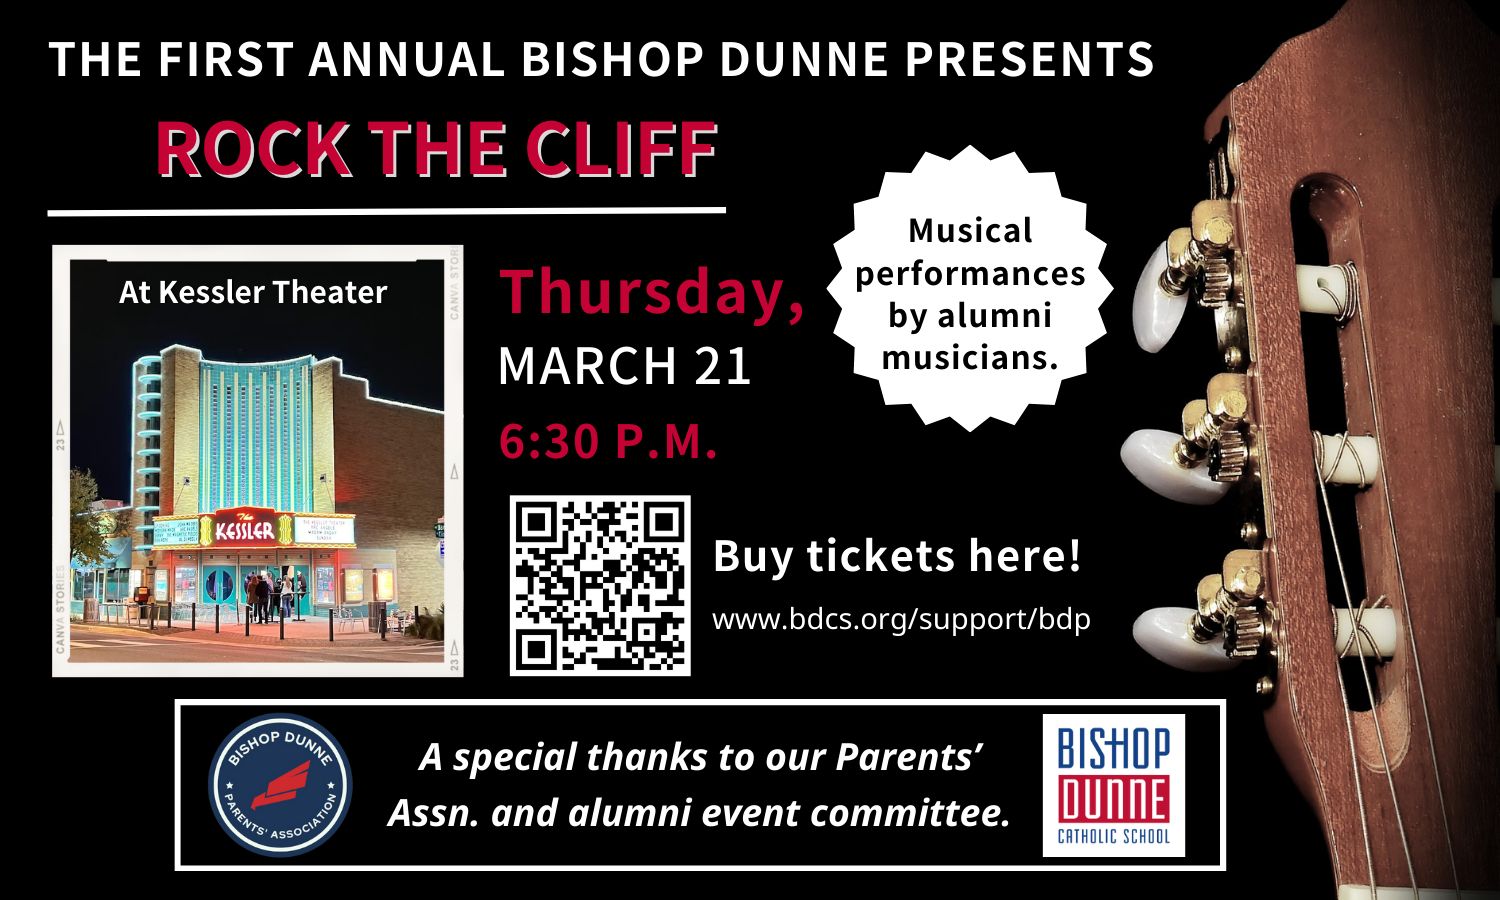 Bishop Dunne Presents "Rock the Cliff", Dallas, Texas, United States